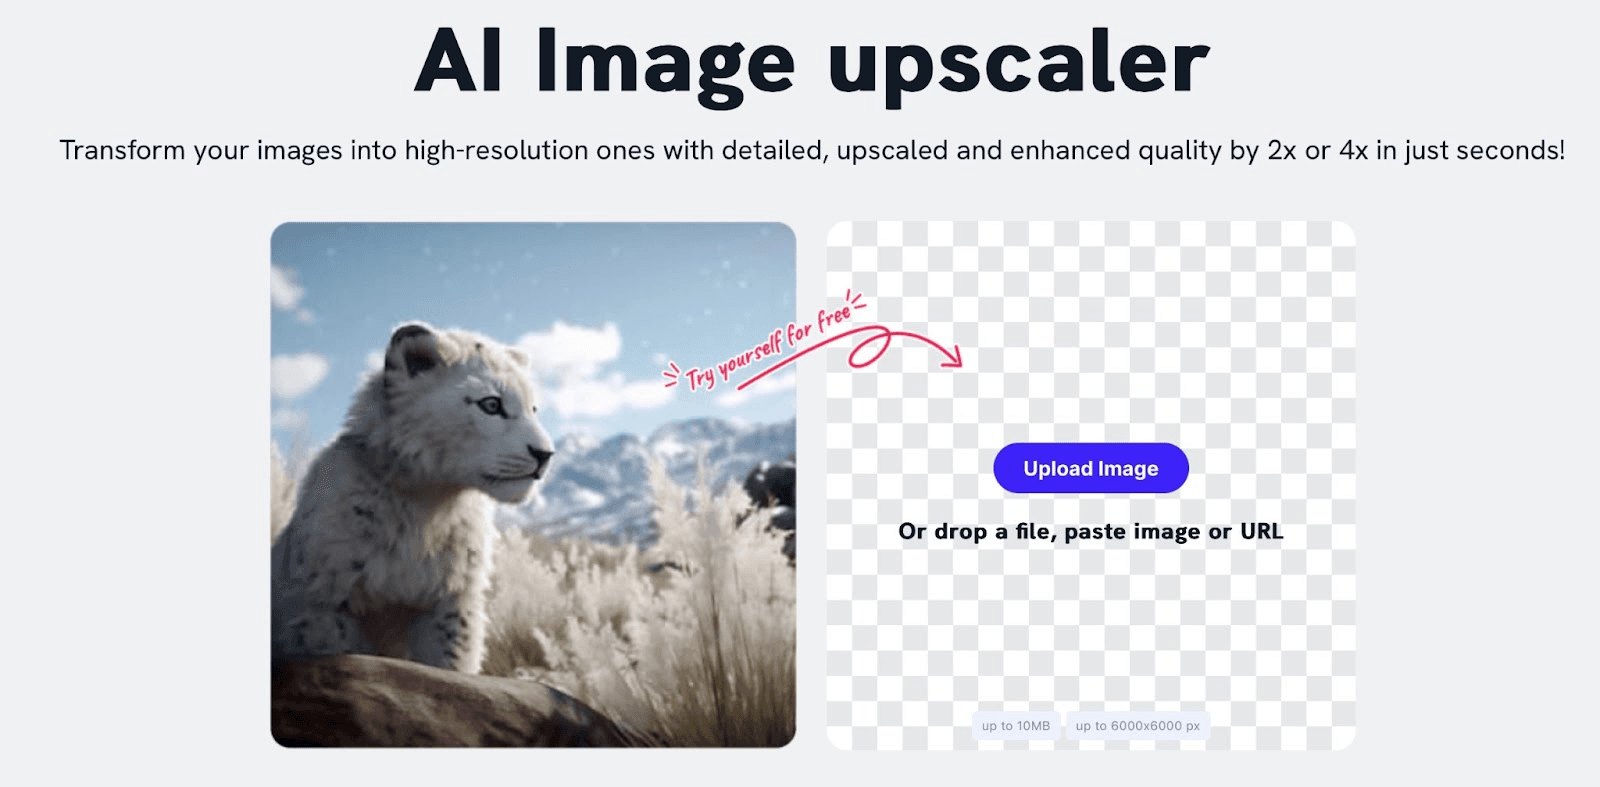 Imagewith.Ai’s Overscale feature